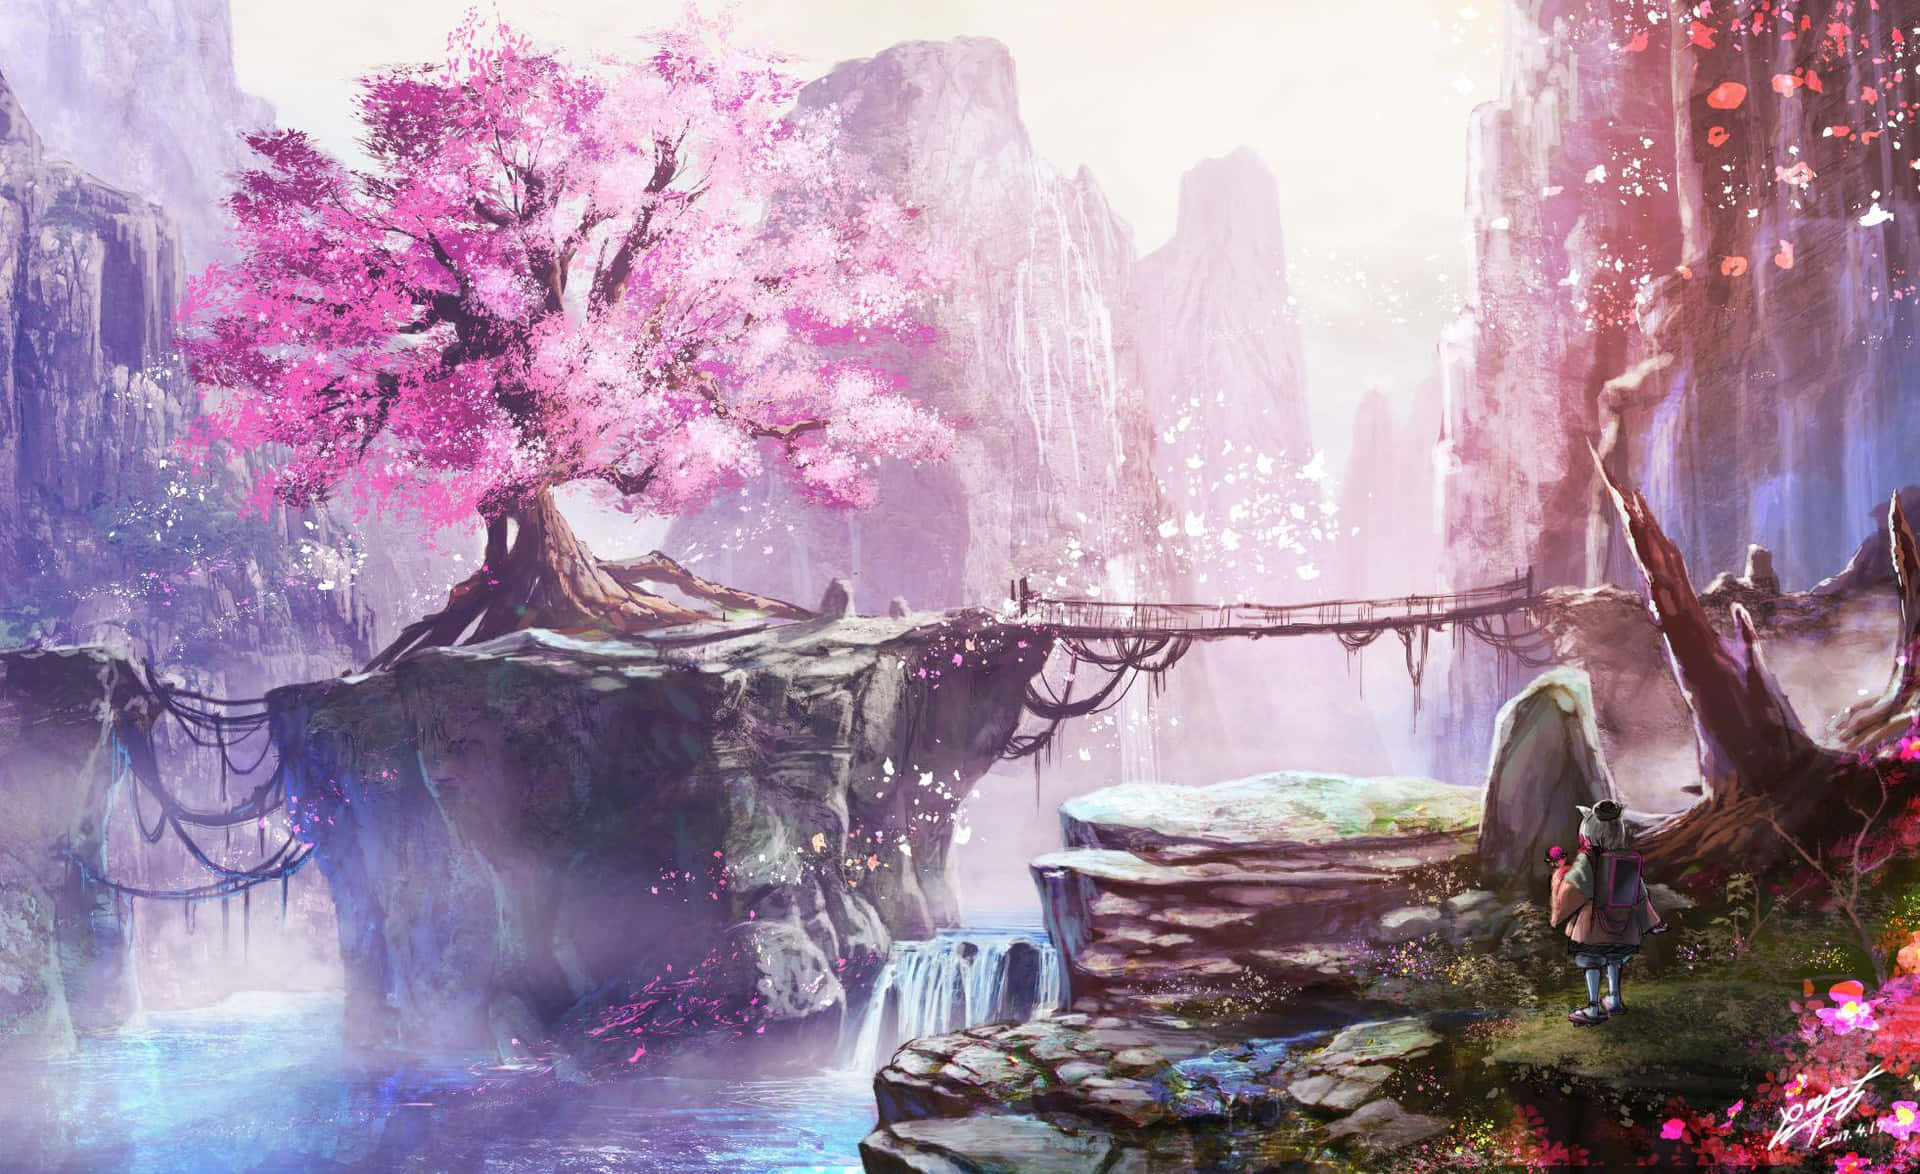 A Fantasy Landscape With A Tree And Waterfall